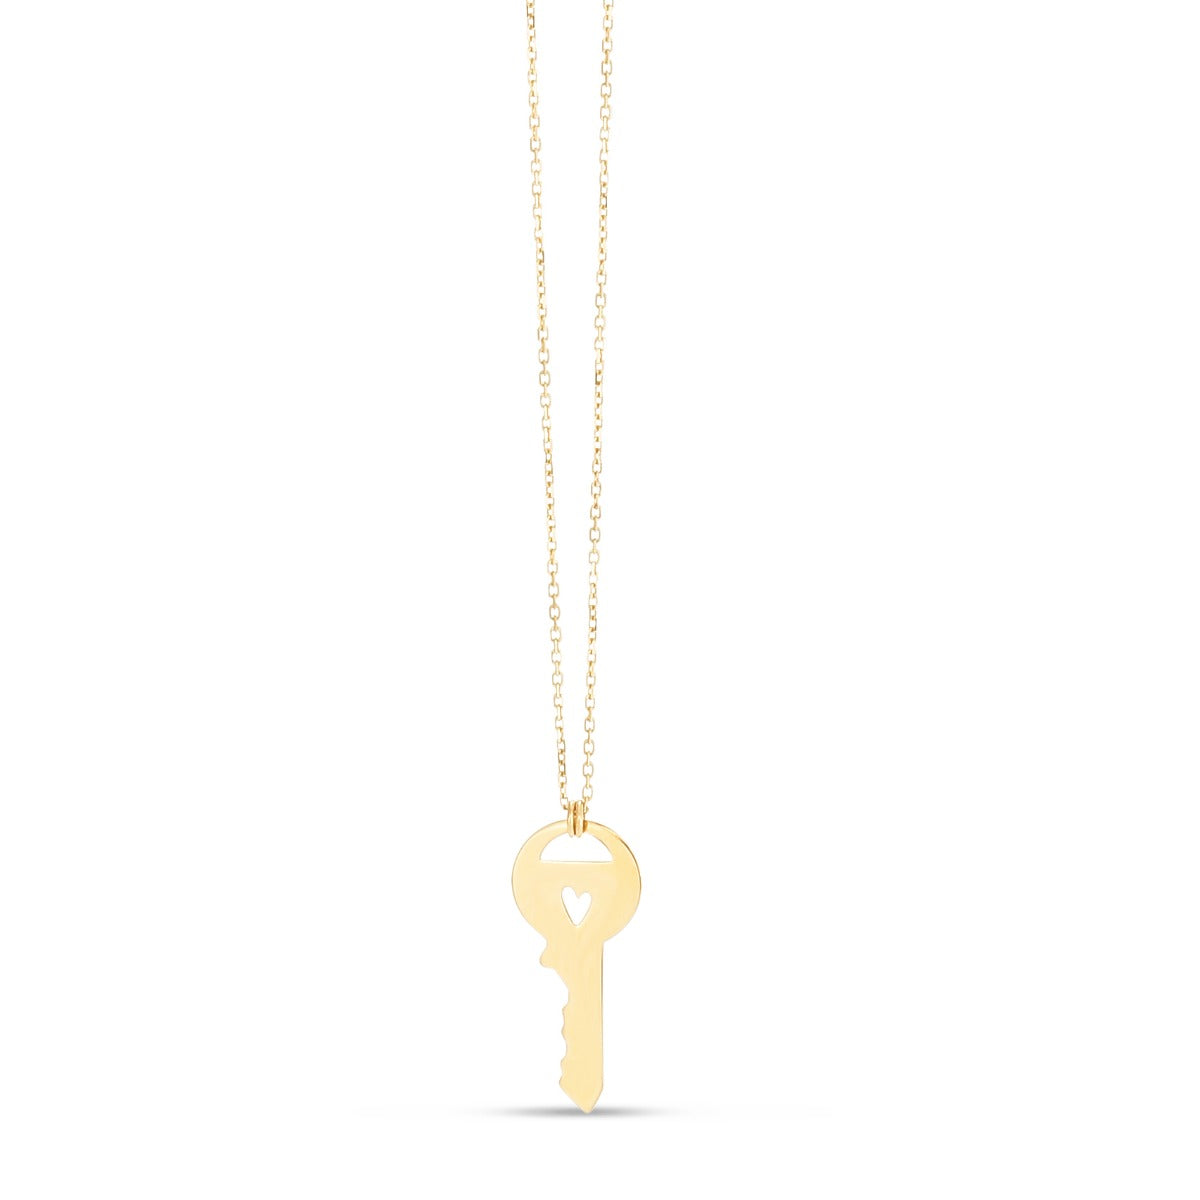 14K Gold Polished Key Necklace with Spring Ring Clasp